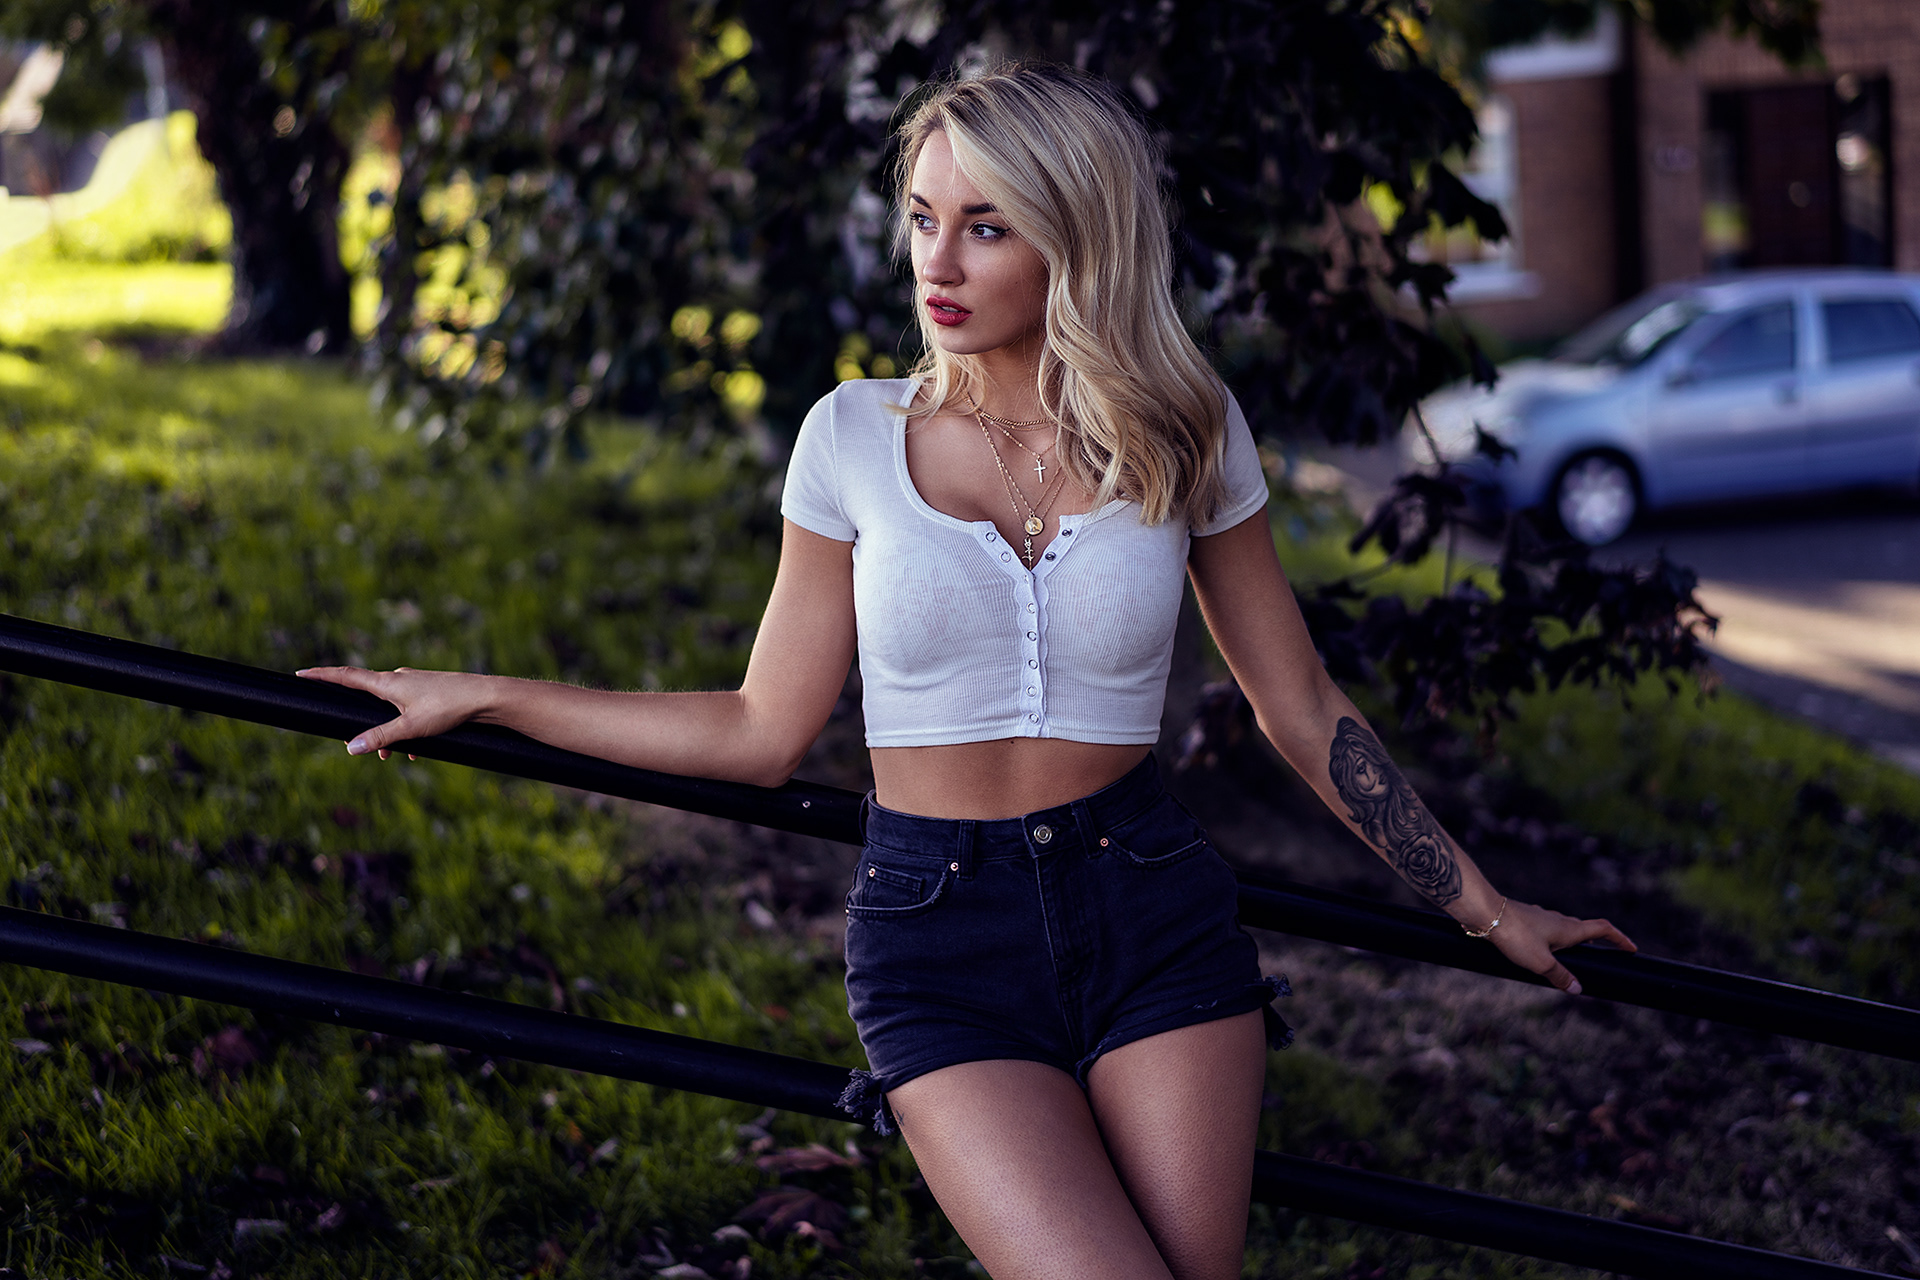 Women Blonde Tattoo Car Trees Women Outdoors Looking Away Red Lipstick Legs Together Black Shorts In 1920x1280